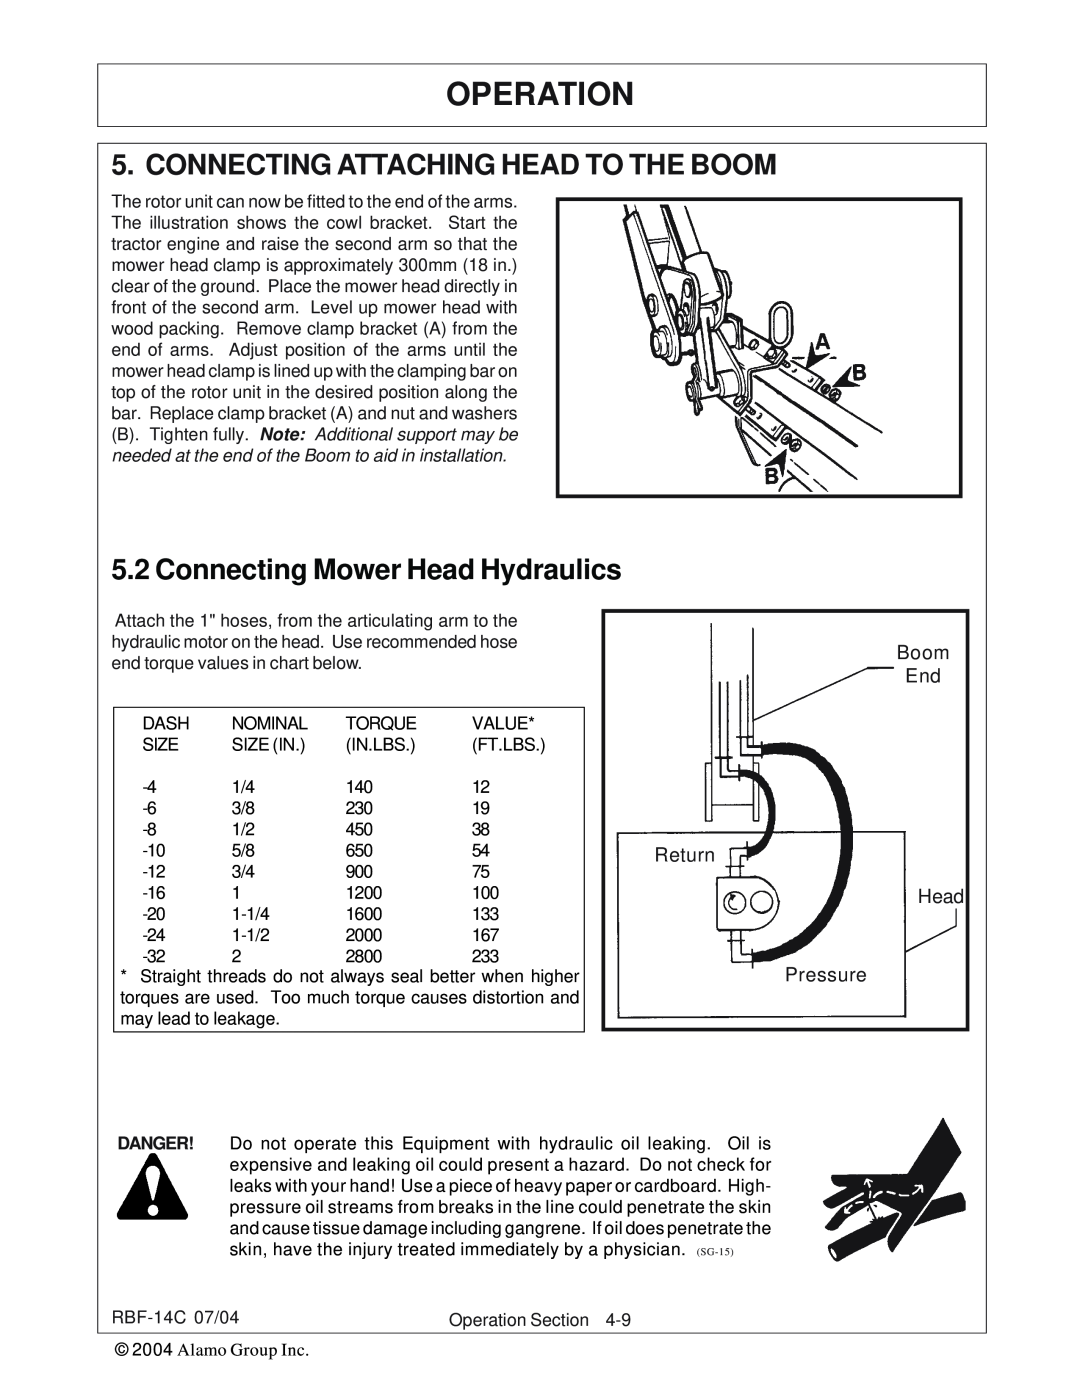 Tiger RBF-14C manual Connecting Attaching Head To The Boom, Connecting Mower Head Hydraulics, Operation 